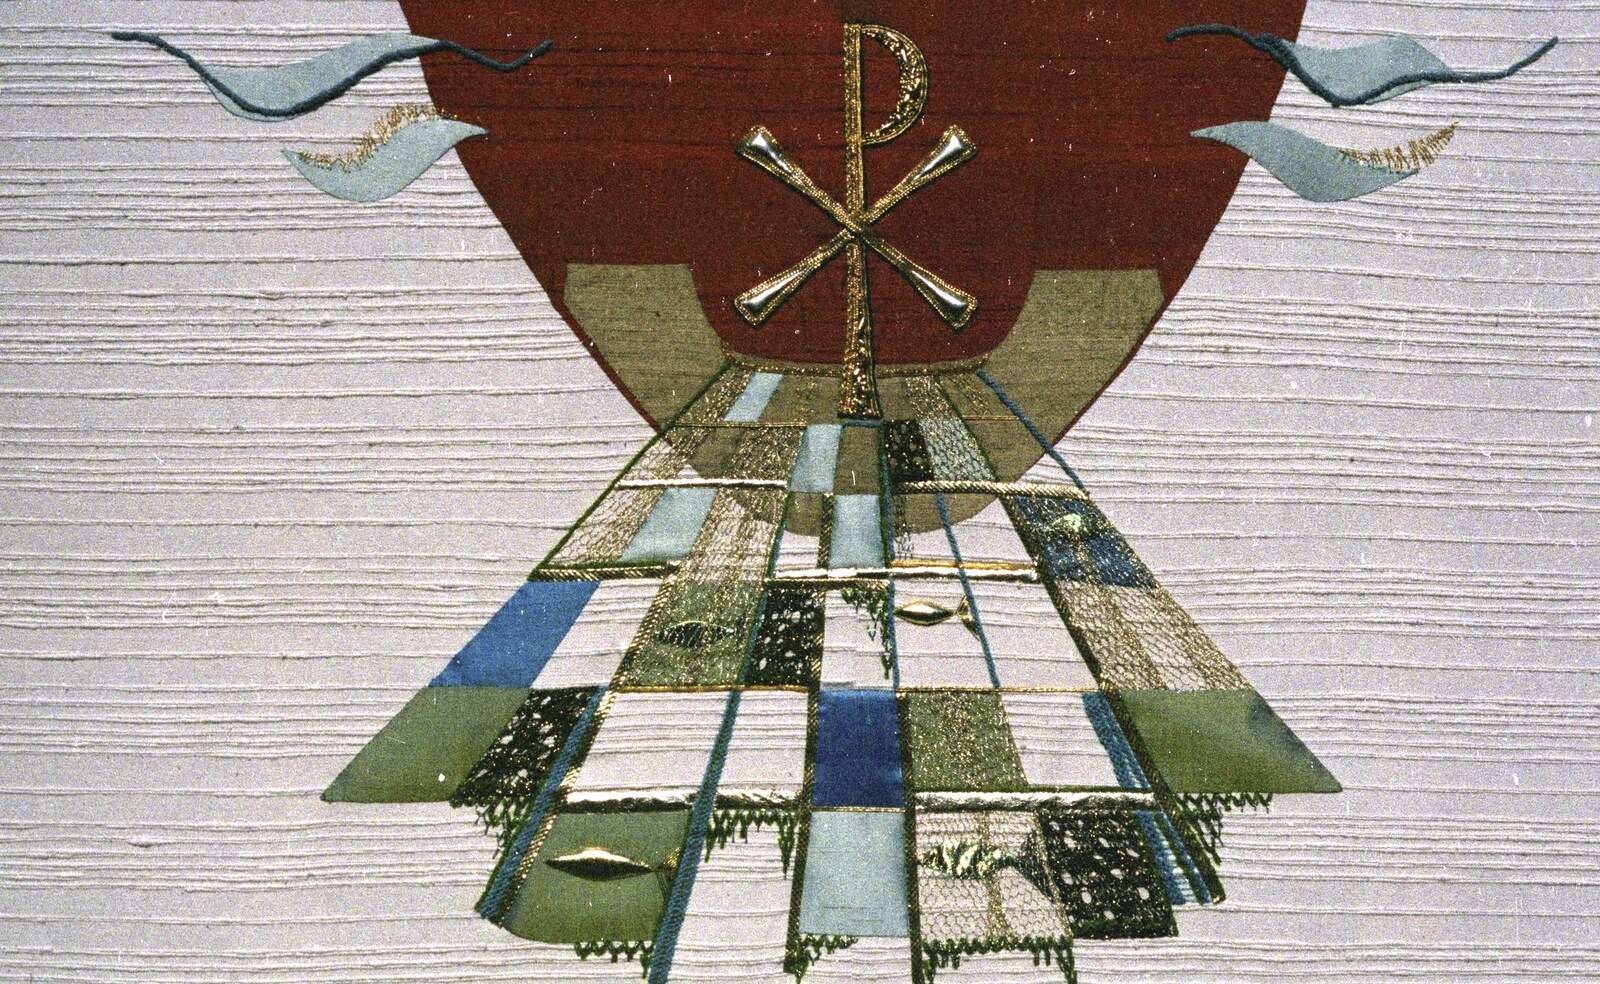 Detail of Isobel Clover's work from Tapestry With Baz, and a Trip to Blakeney, Suffolk and Norfolk - 14th May 1990